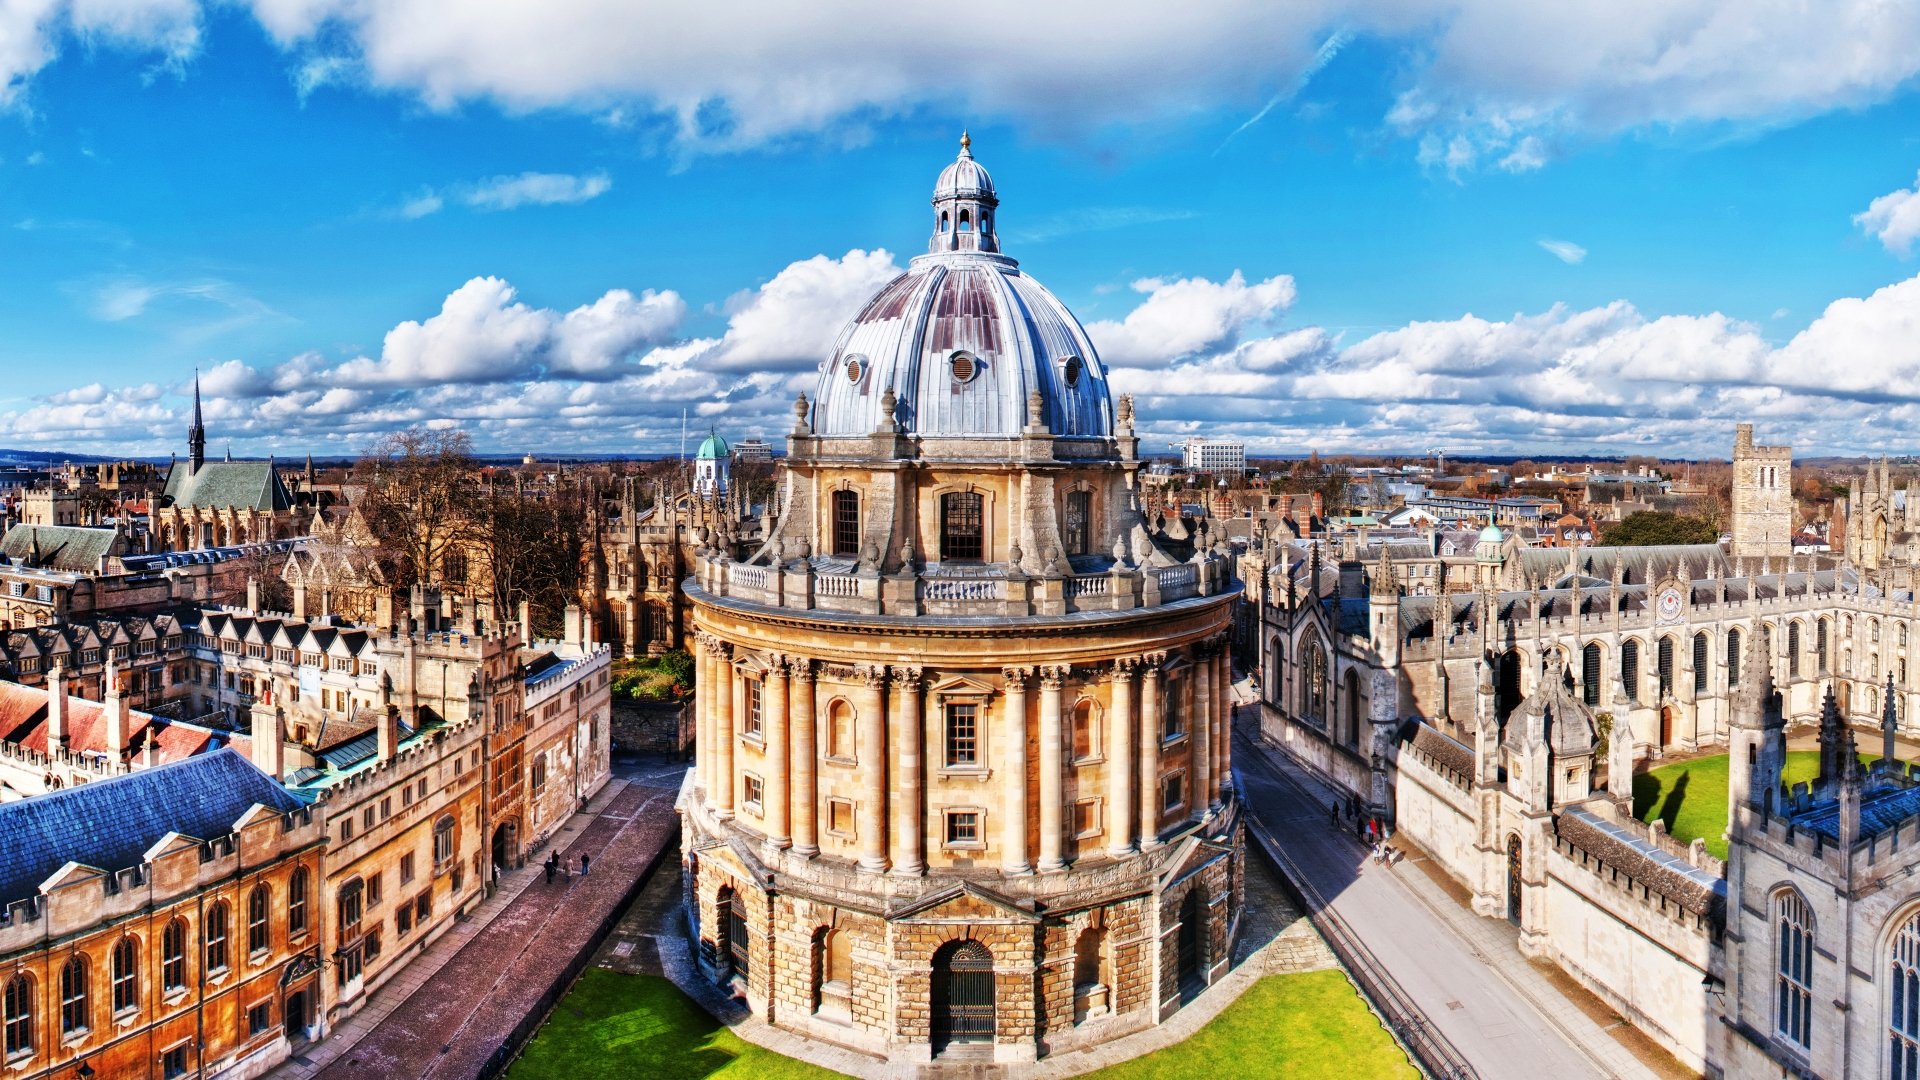 Oxford 4k Ultra HD Wallpaper and Background Image | 3840x2160 | ID:545297